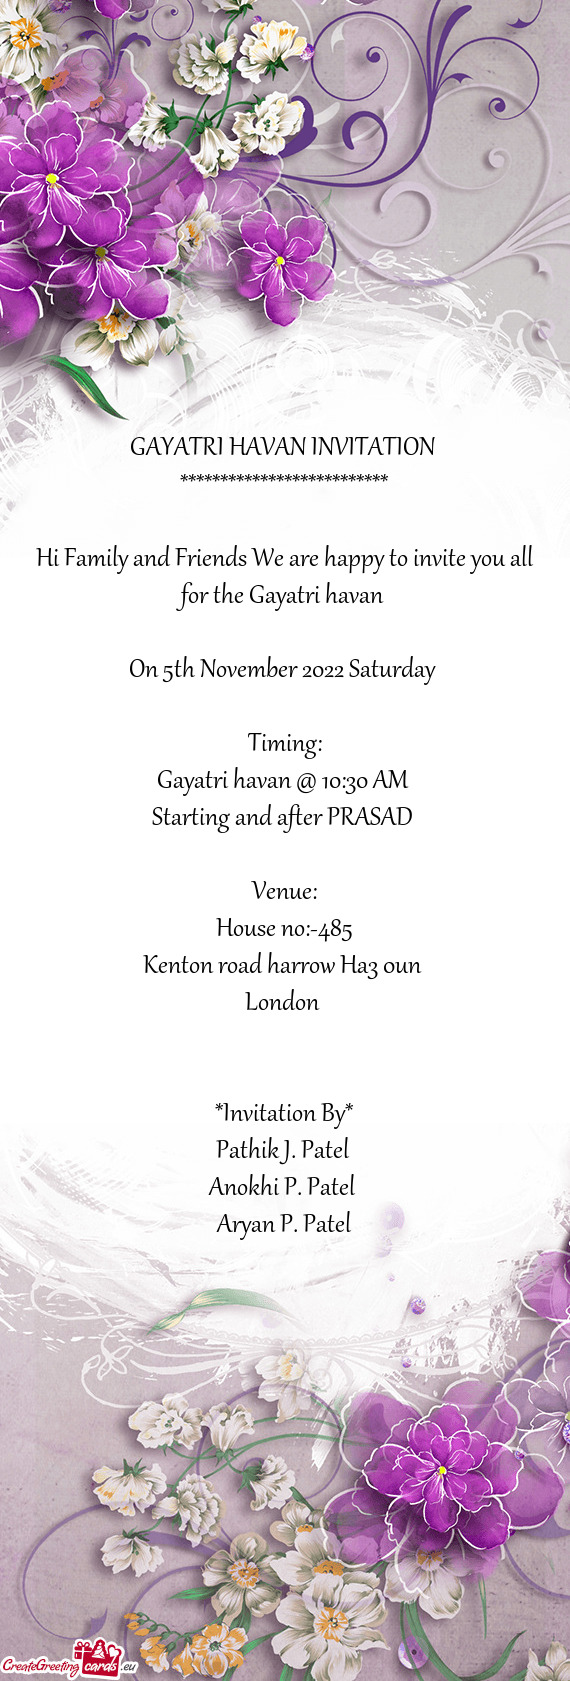 Hi Family and Friends We are happy to invite you all for the Gayatri havan